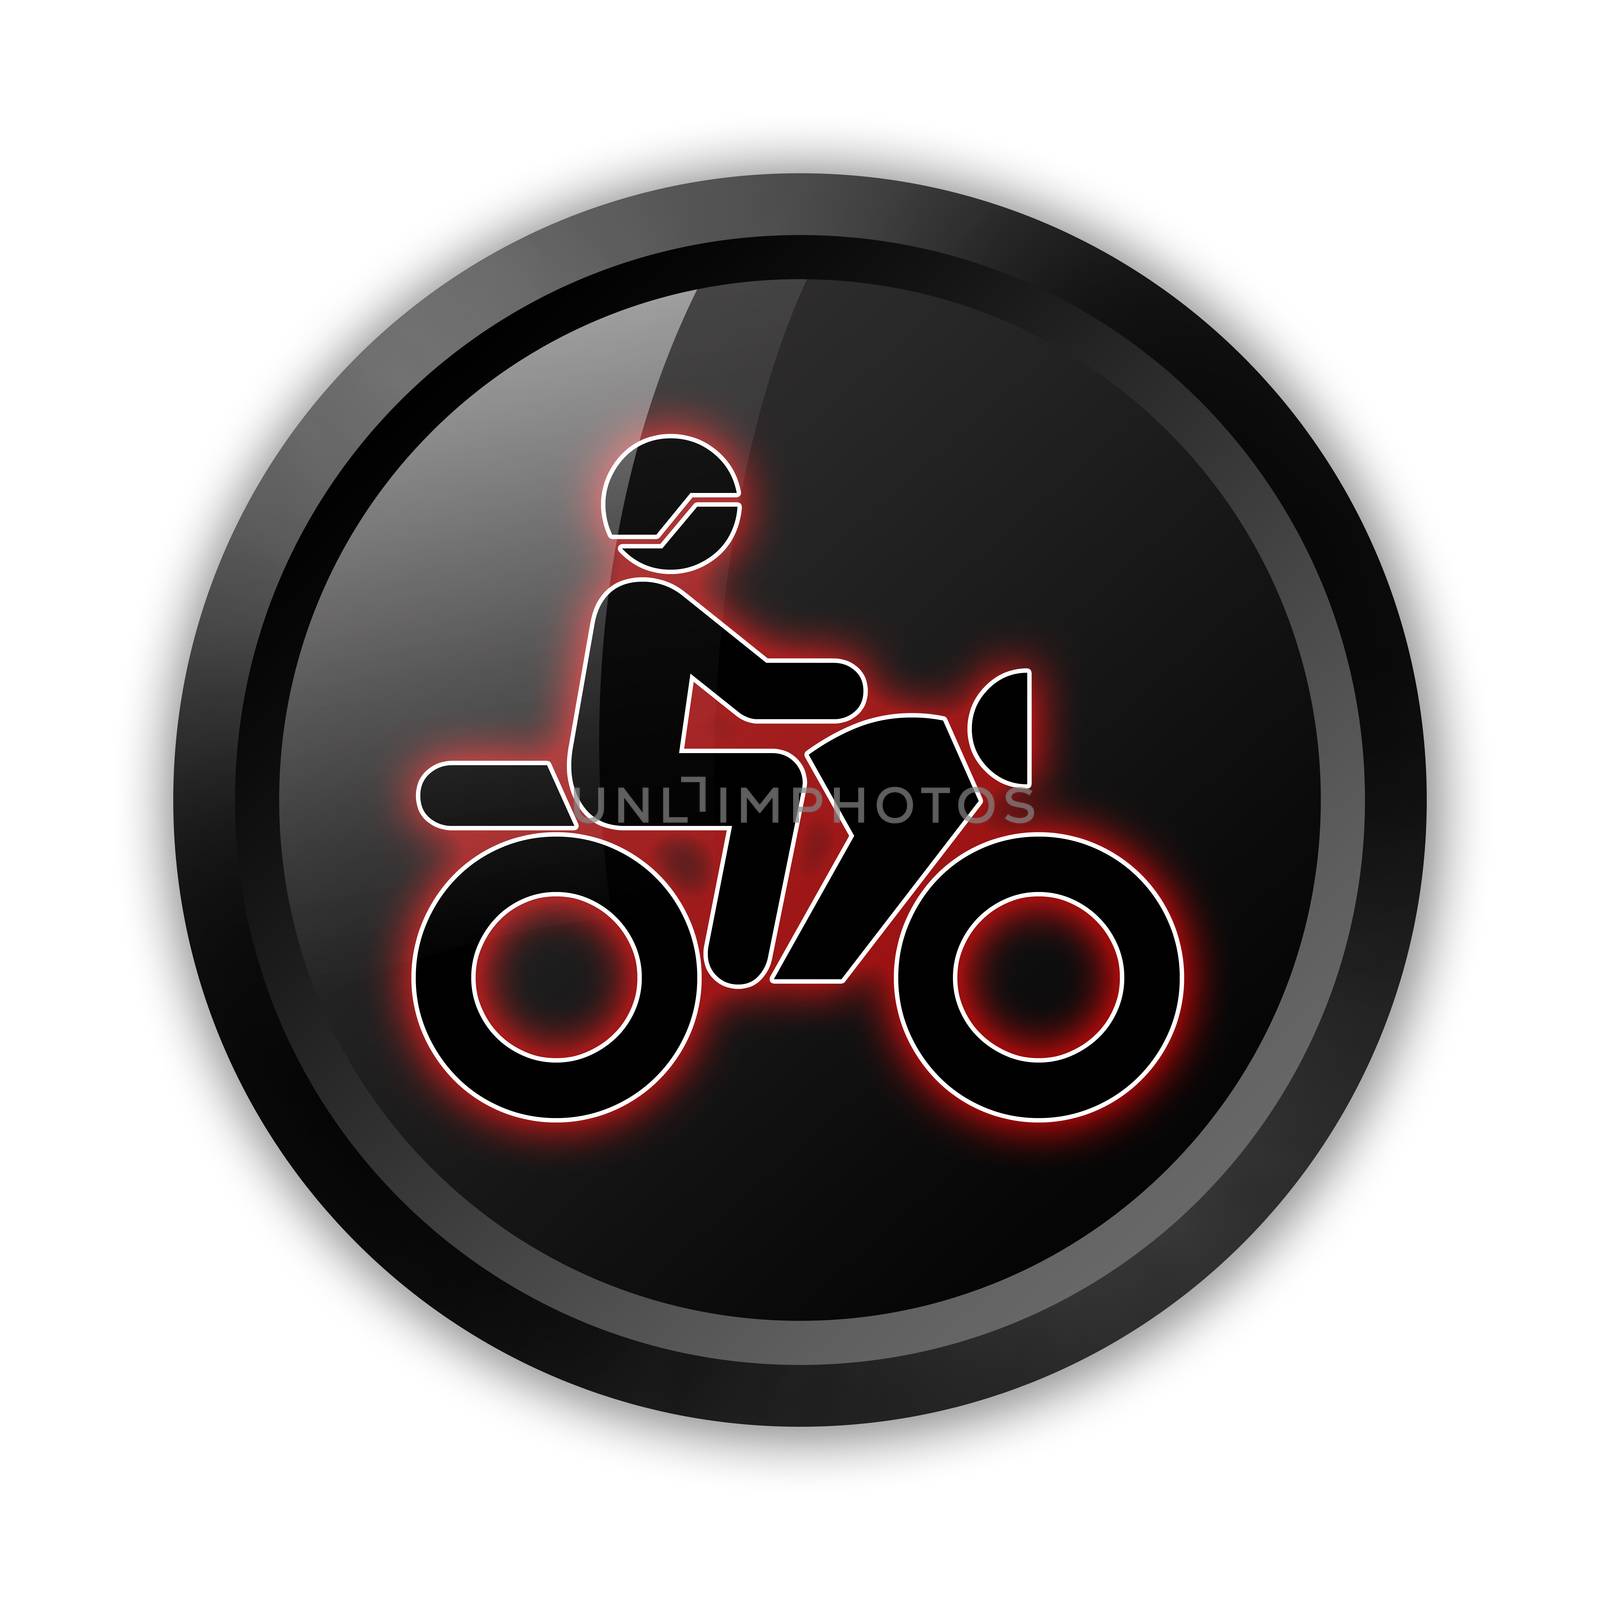 Icon, Button, Pictogram with Motorbike Trail symbol